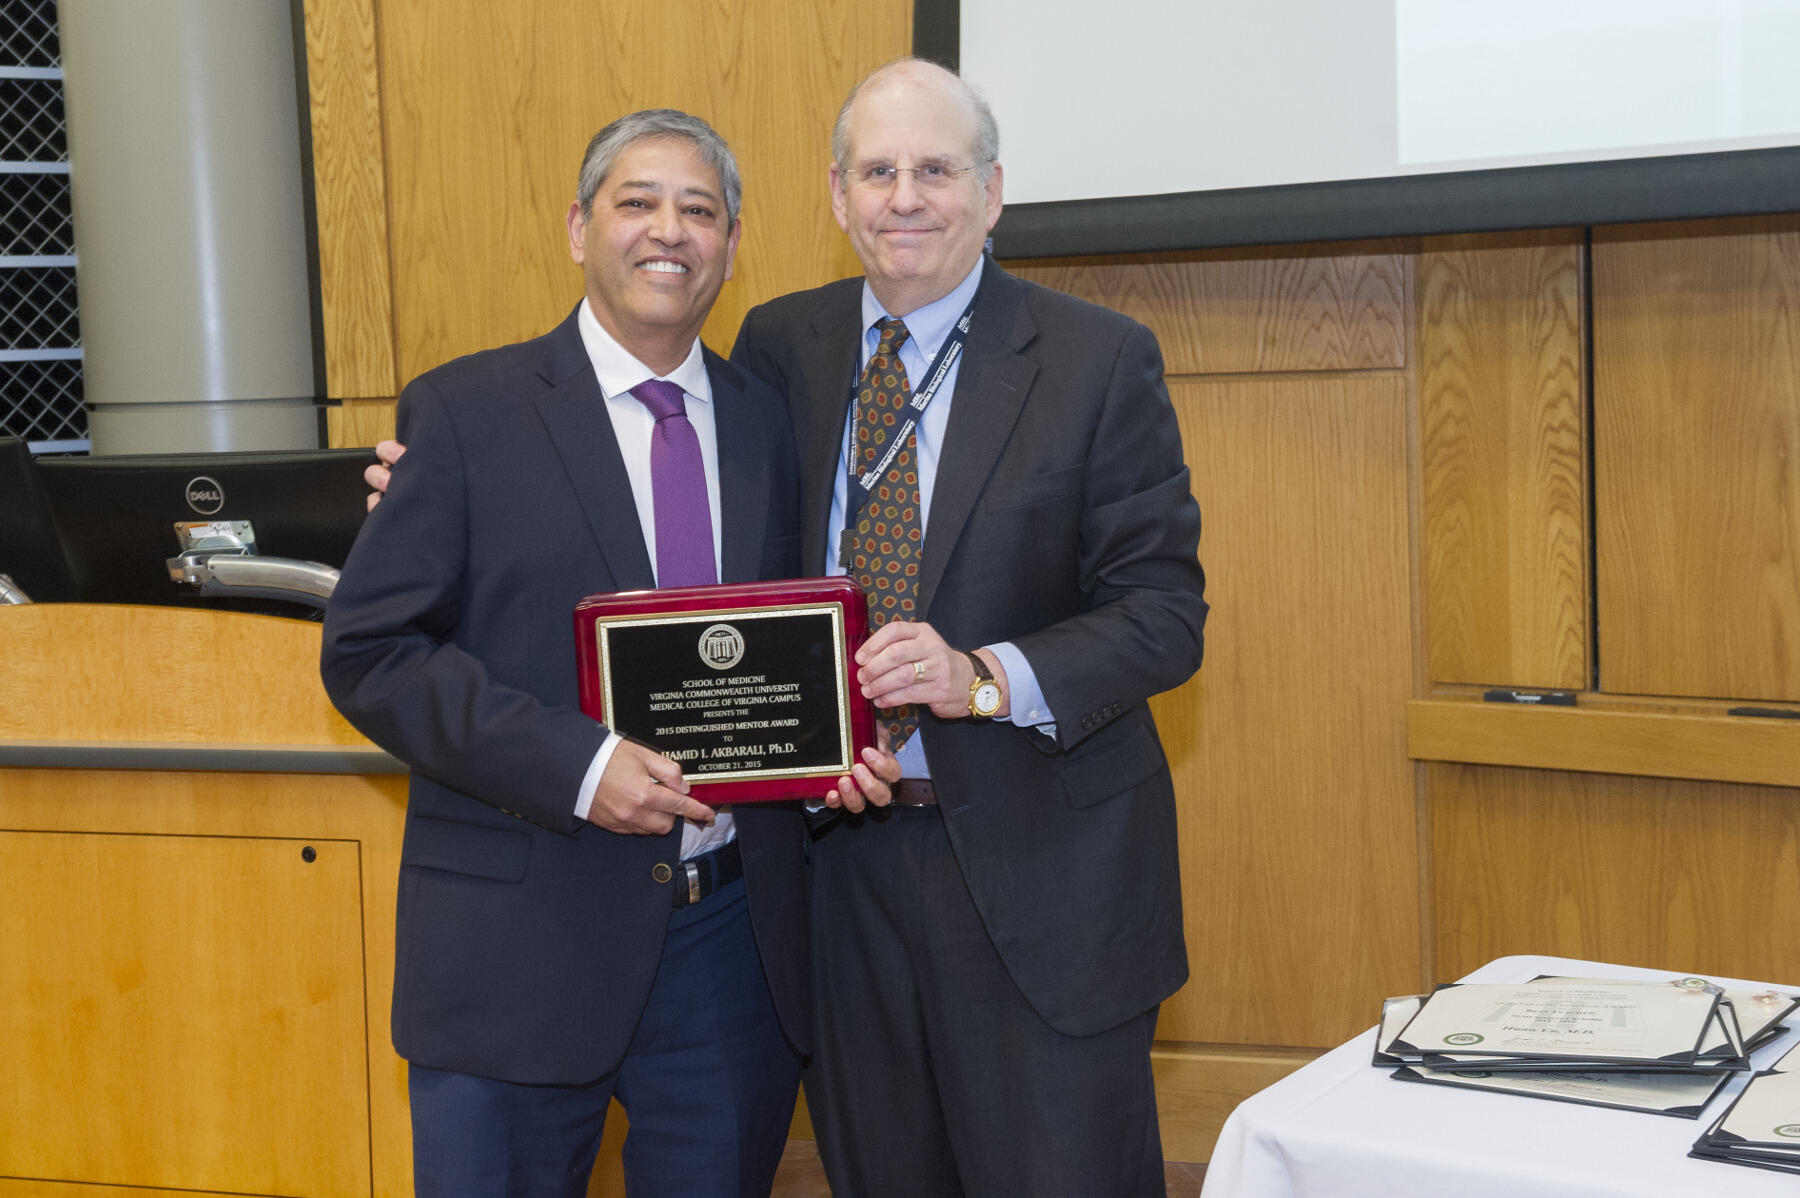 This year’s Distinguished Mentor Award went to Hamid I. Akbarali (left), Ph.D., professor in the Department of Pharmacology and Toxicology.  Jerome Strauss (right), M.D., Ph.D., dean of the VCU School of Medicine, presented the award.  